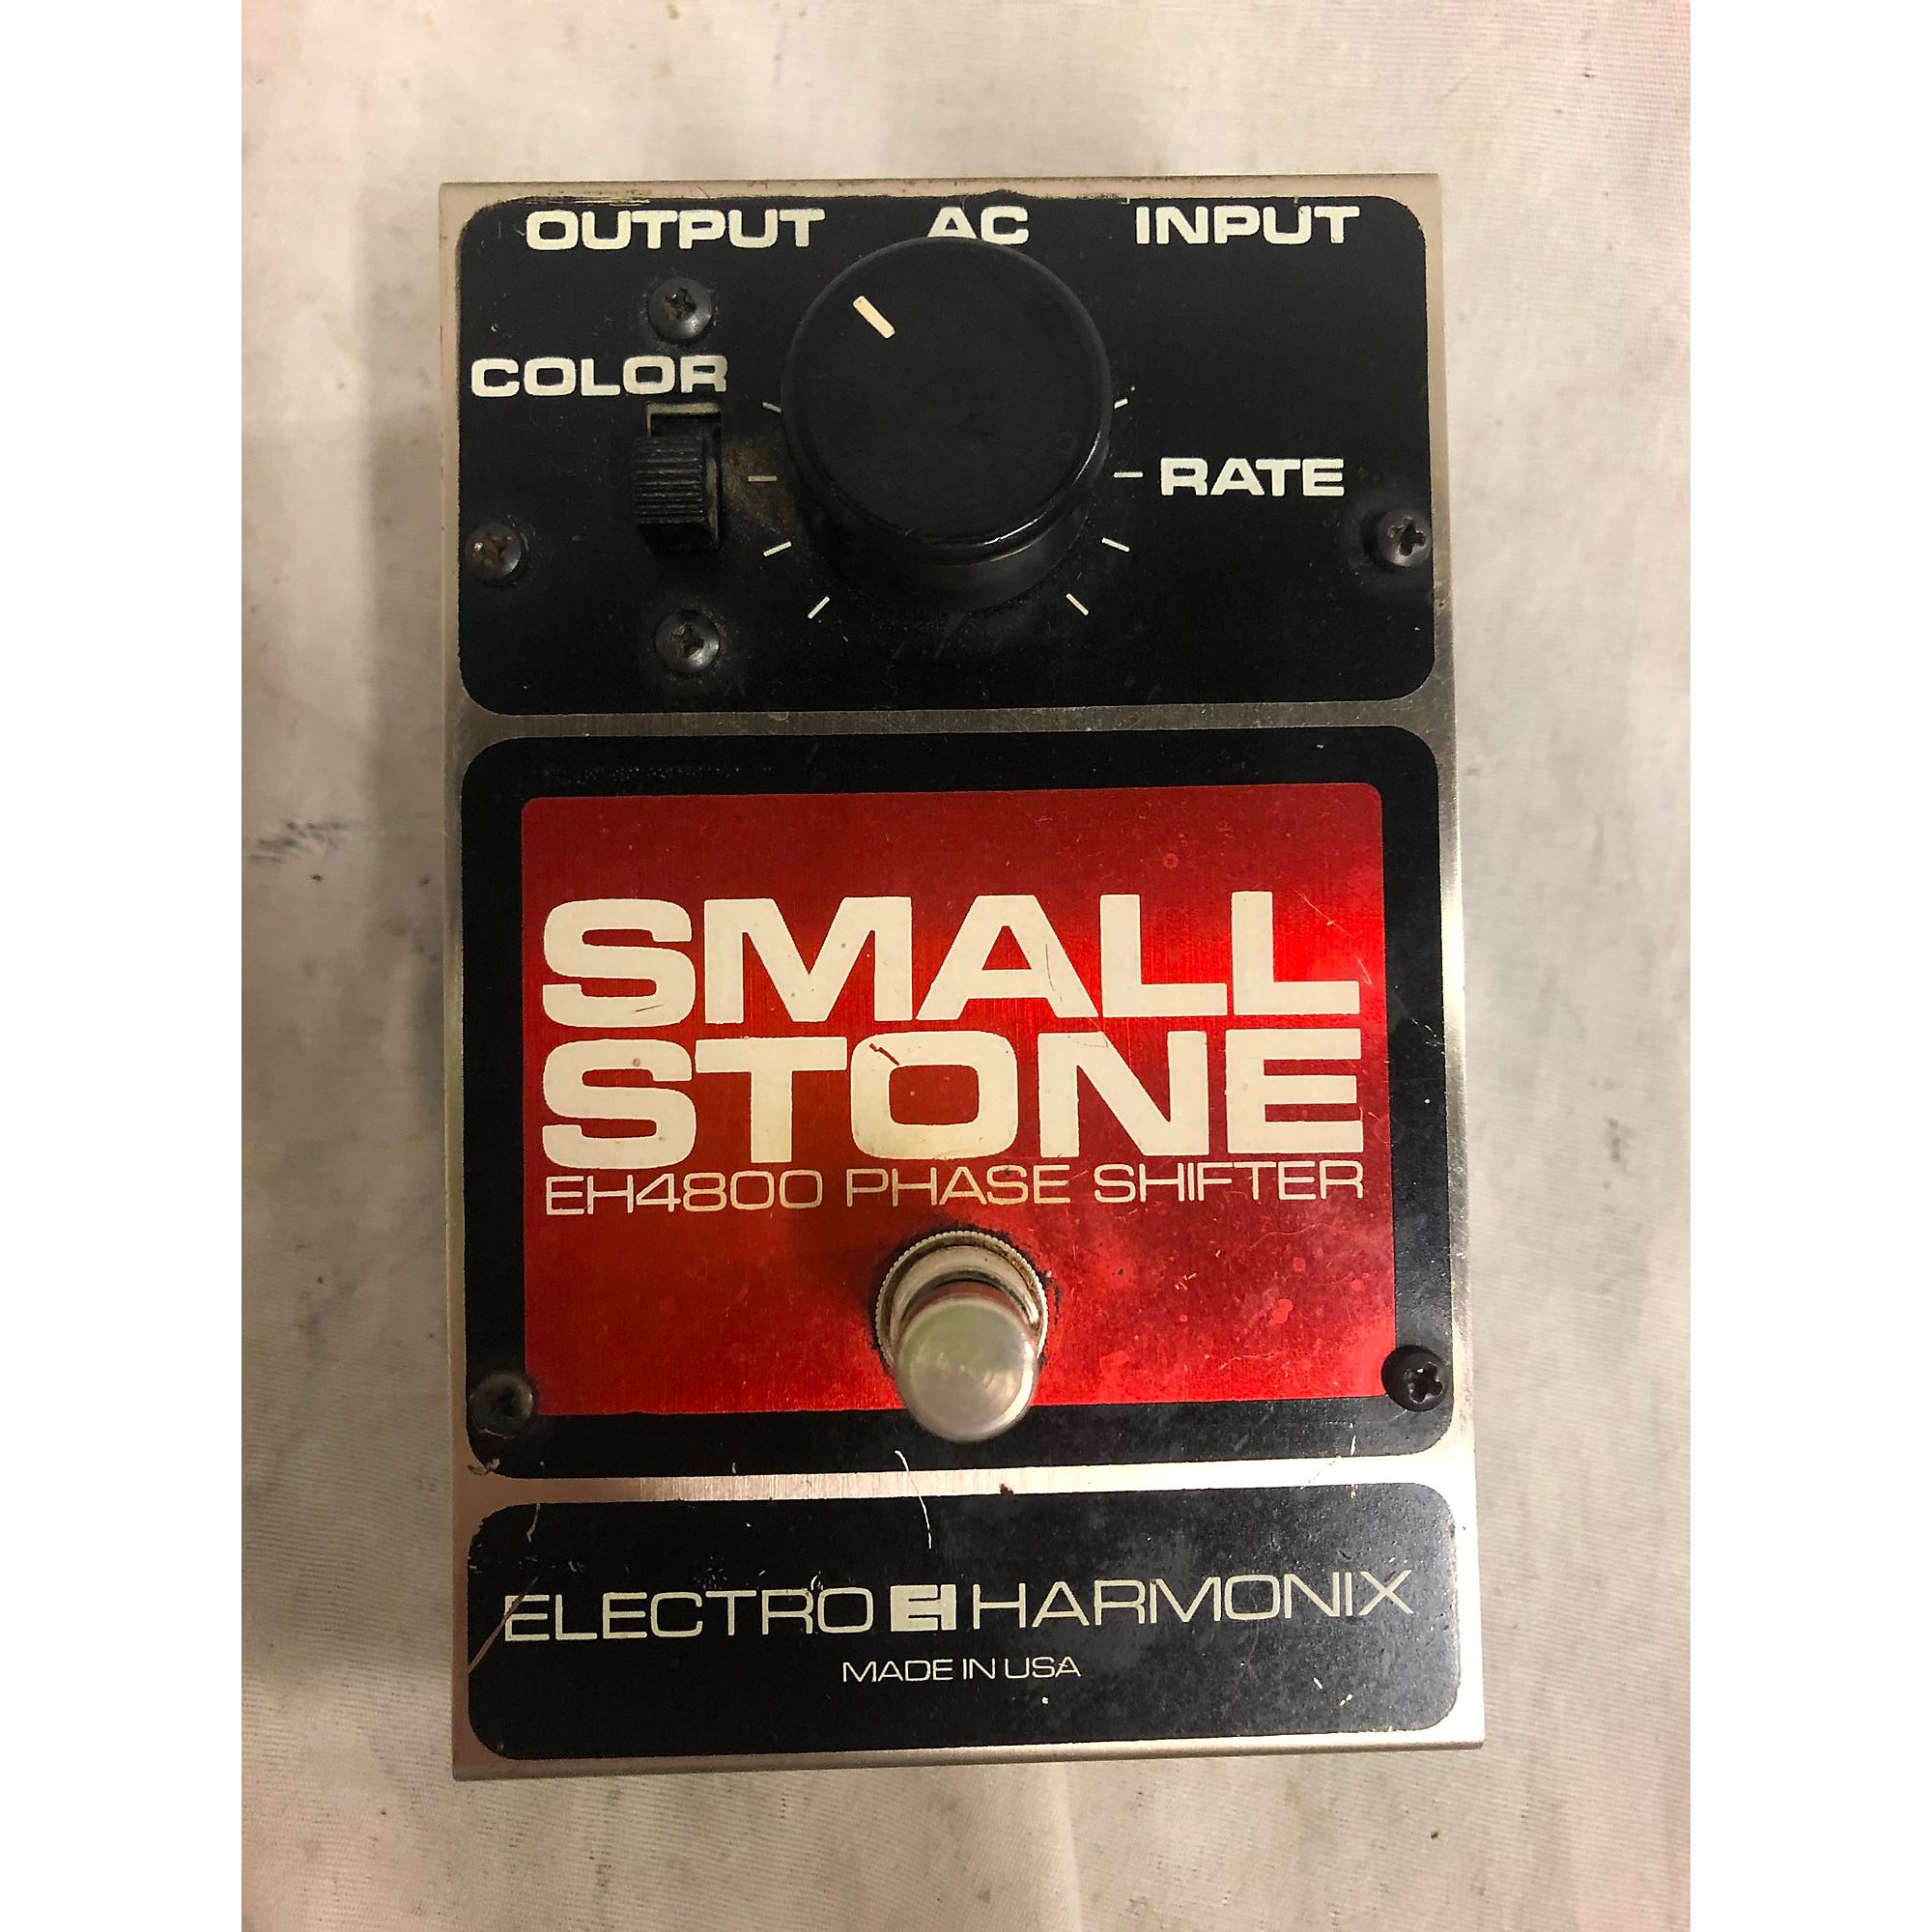 Vintage Electro-Harmonix 1982 Small Stone Eh4800 Phase Shifter Effect Pedal